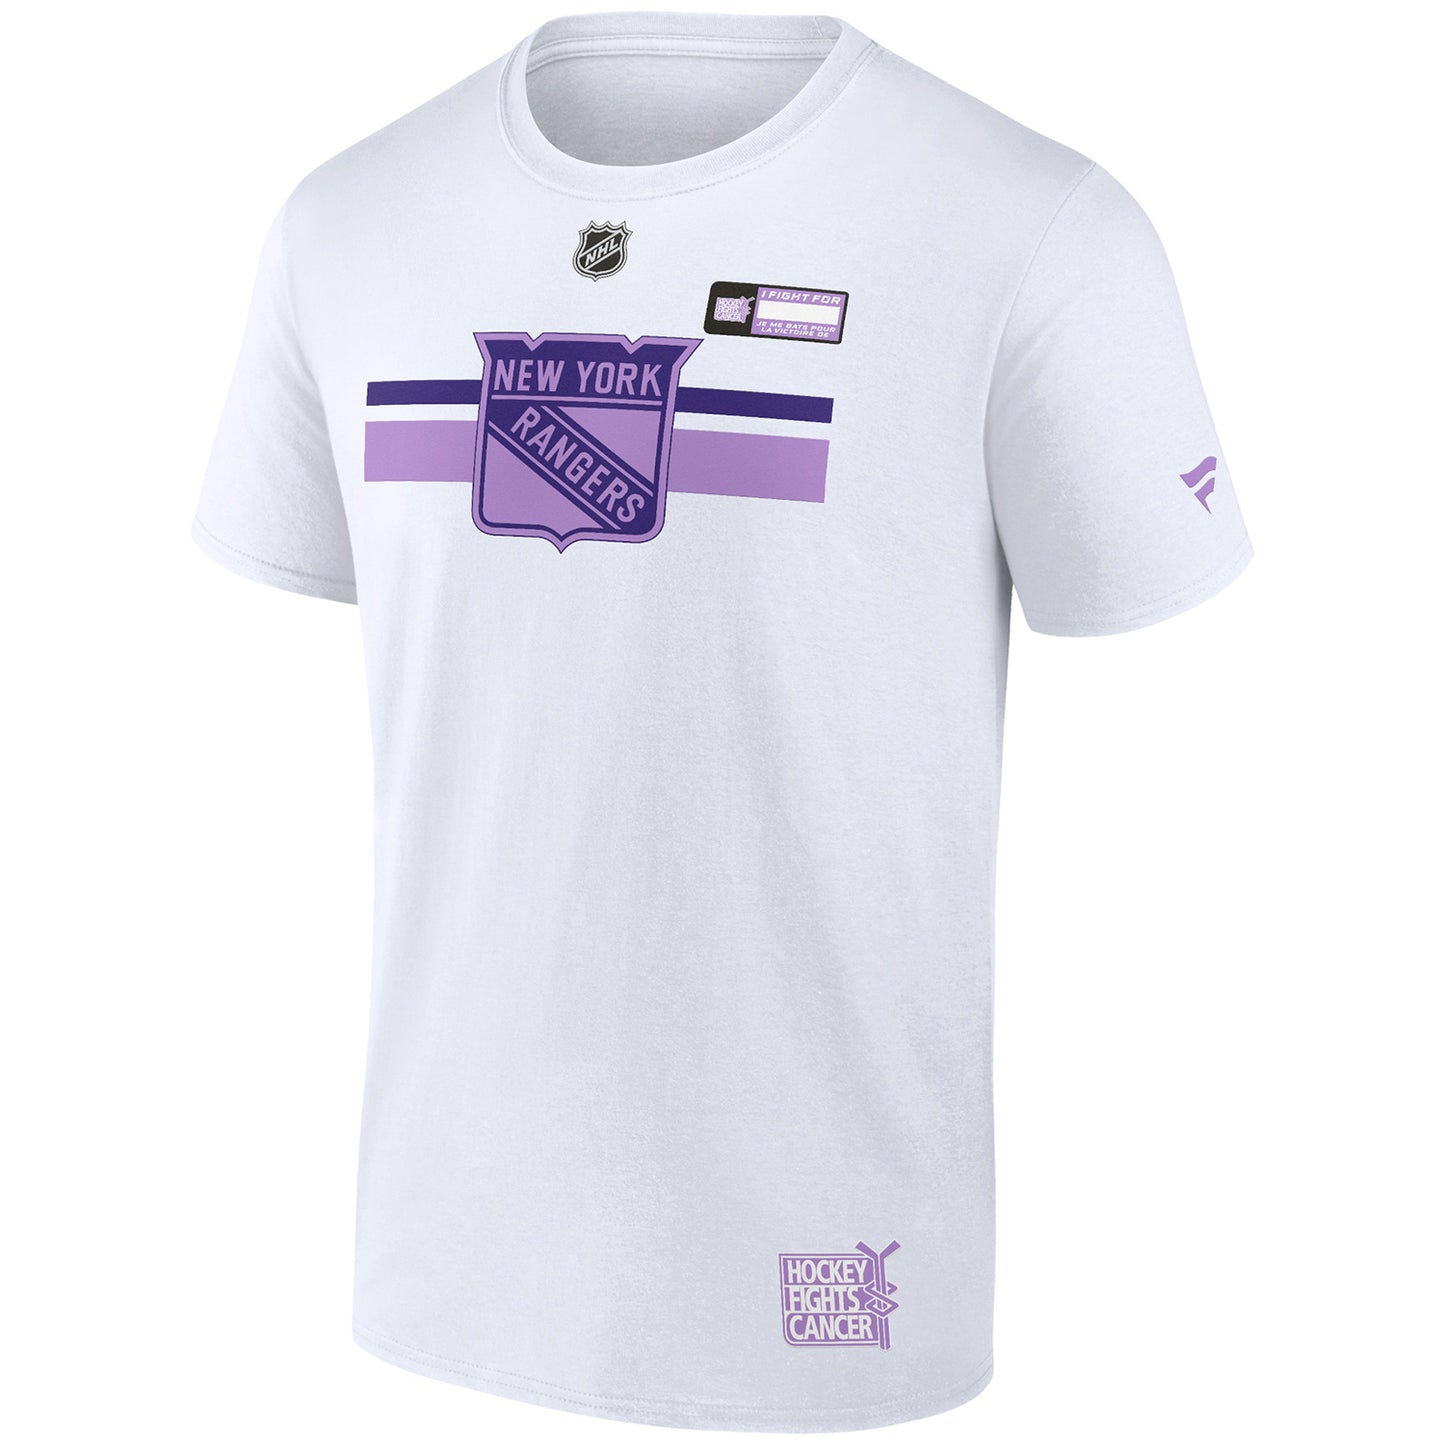 Fanatics Rangers Authentic Pro Hockey Fights Cancer Tee In White & Purple - Front View